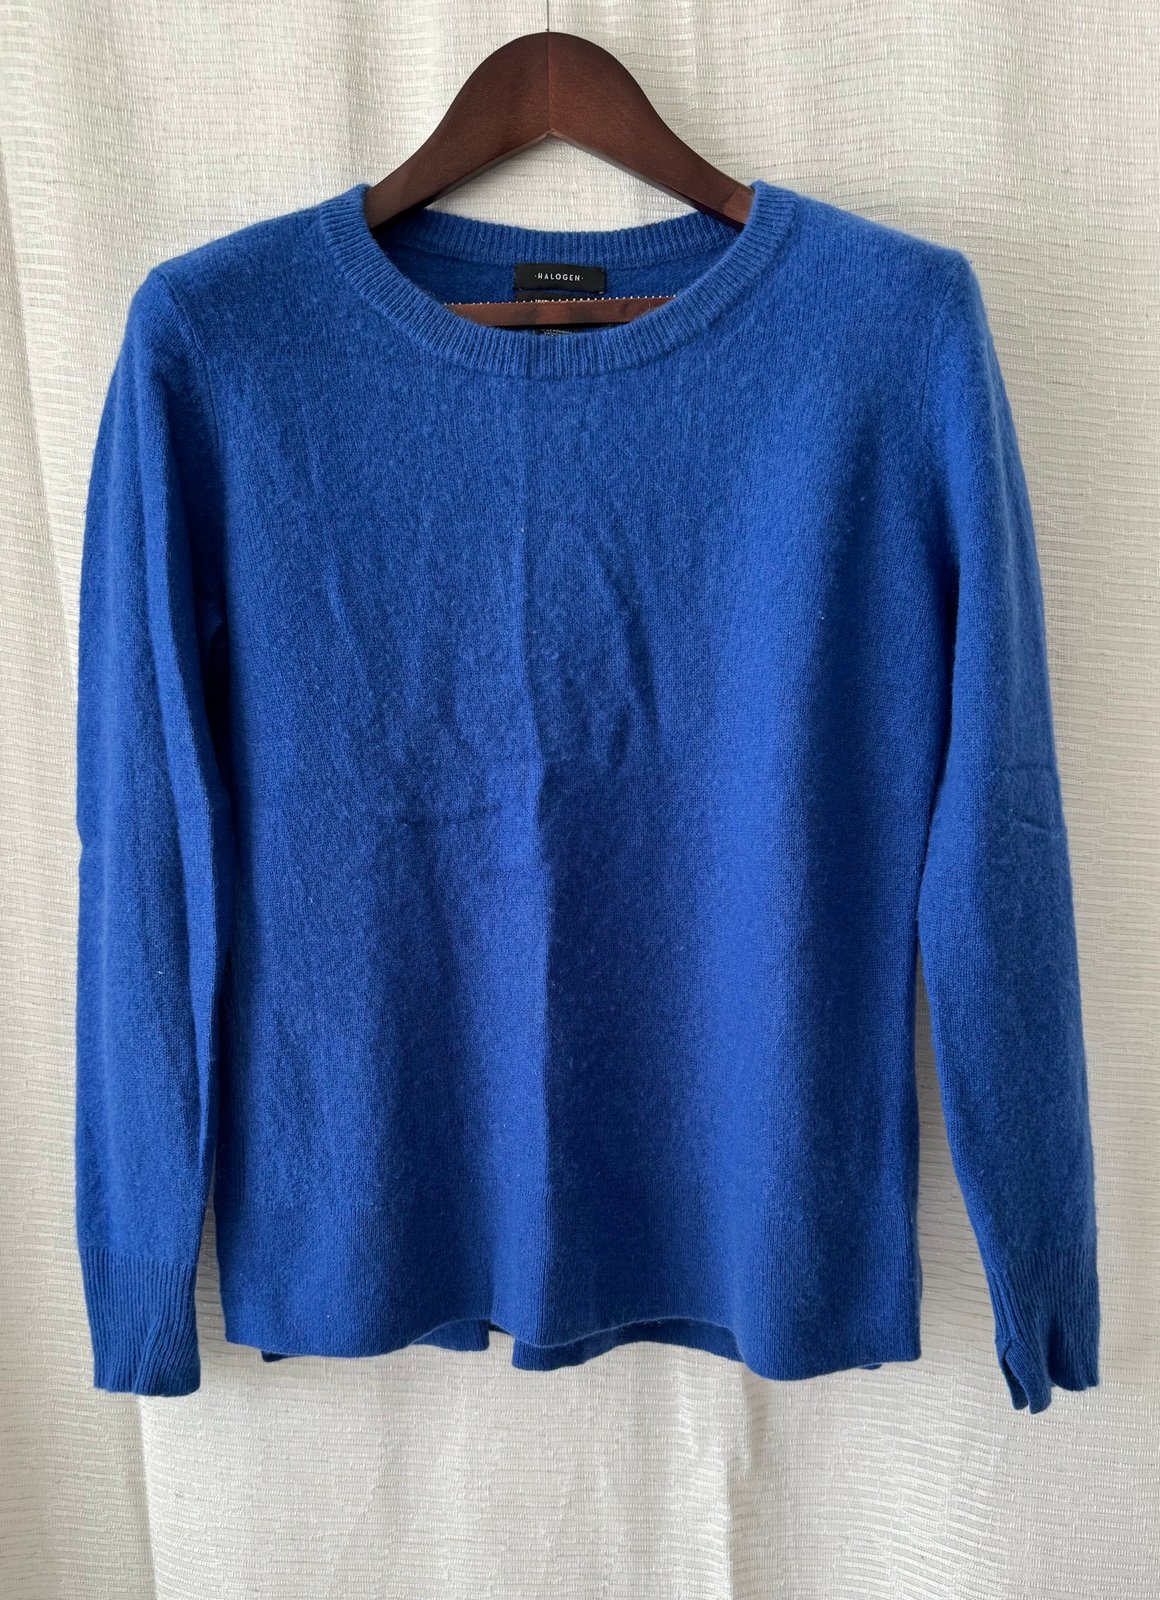 Factory Direct  Halogen Colbolt Blue 100% Cashmere Crewneck Women’s Sweater size Small oDNpsmoW1 just buy it